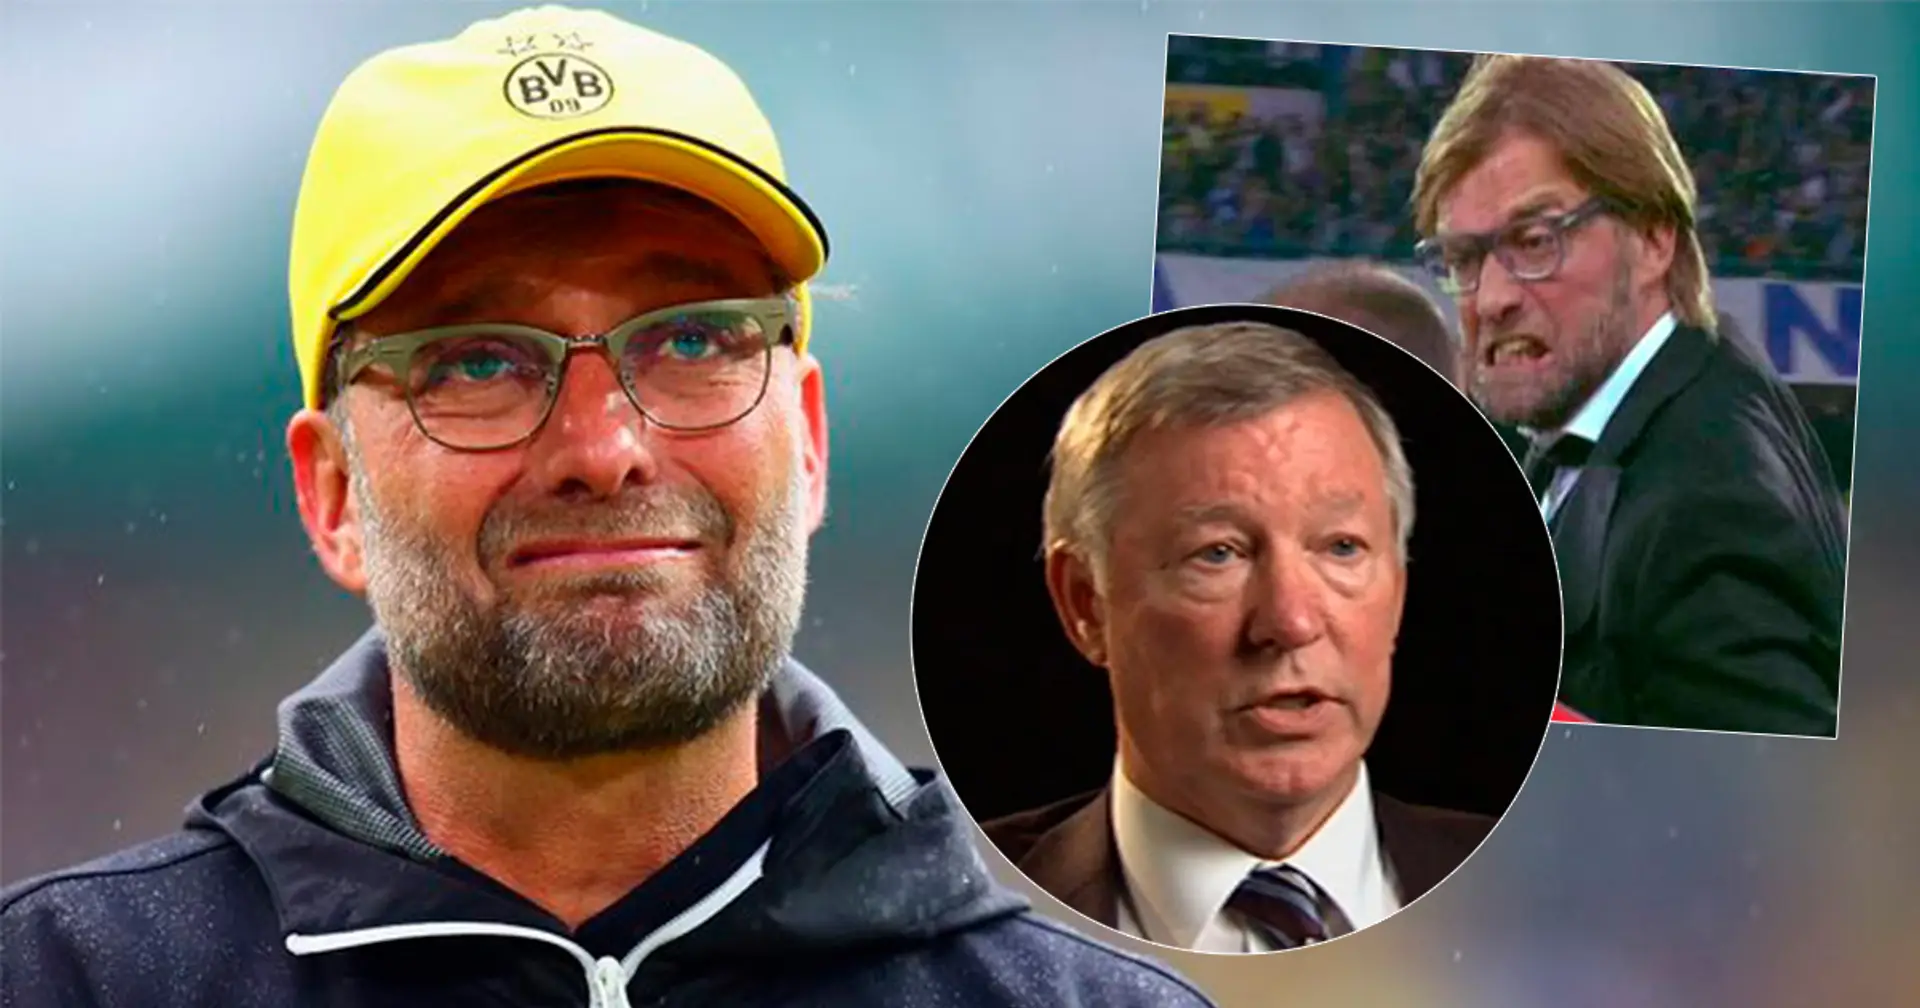 'Really, tears in my eyes': How Klopp slammed Man United's treatment of his ex-player